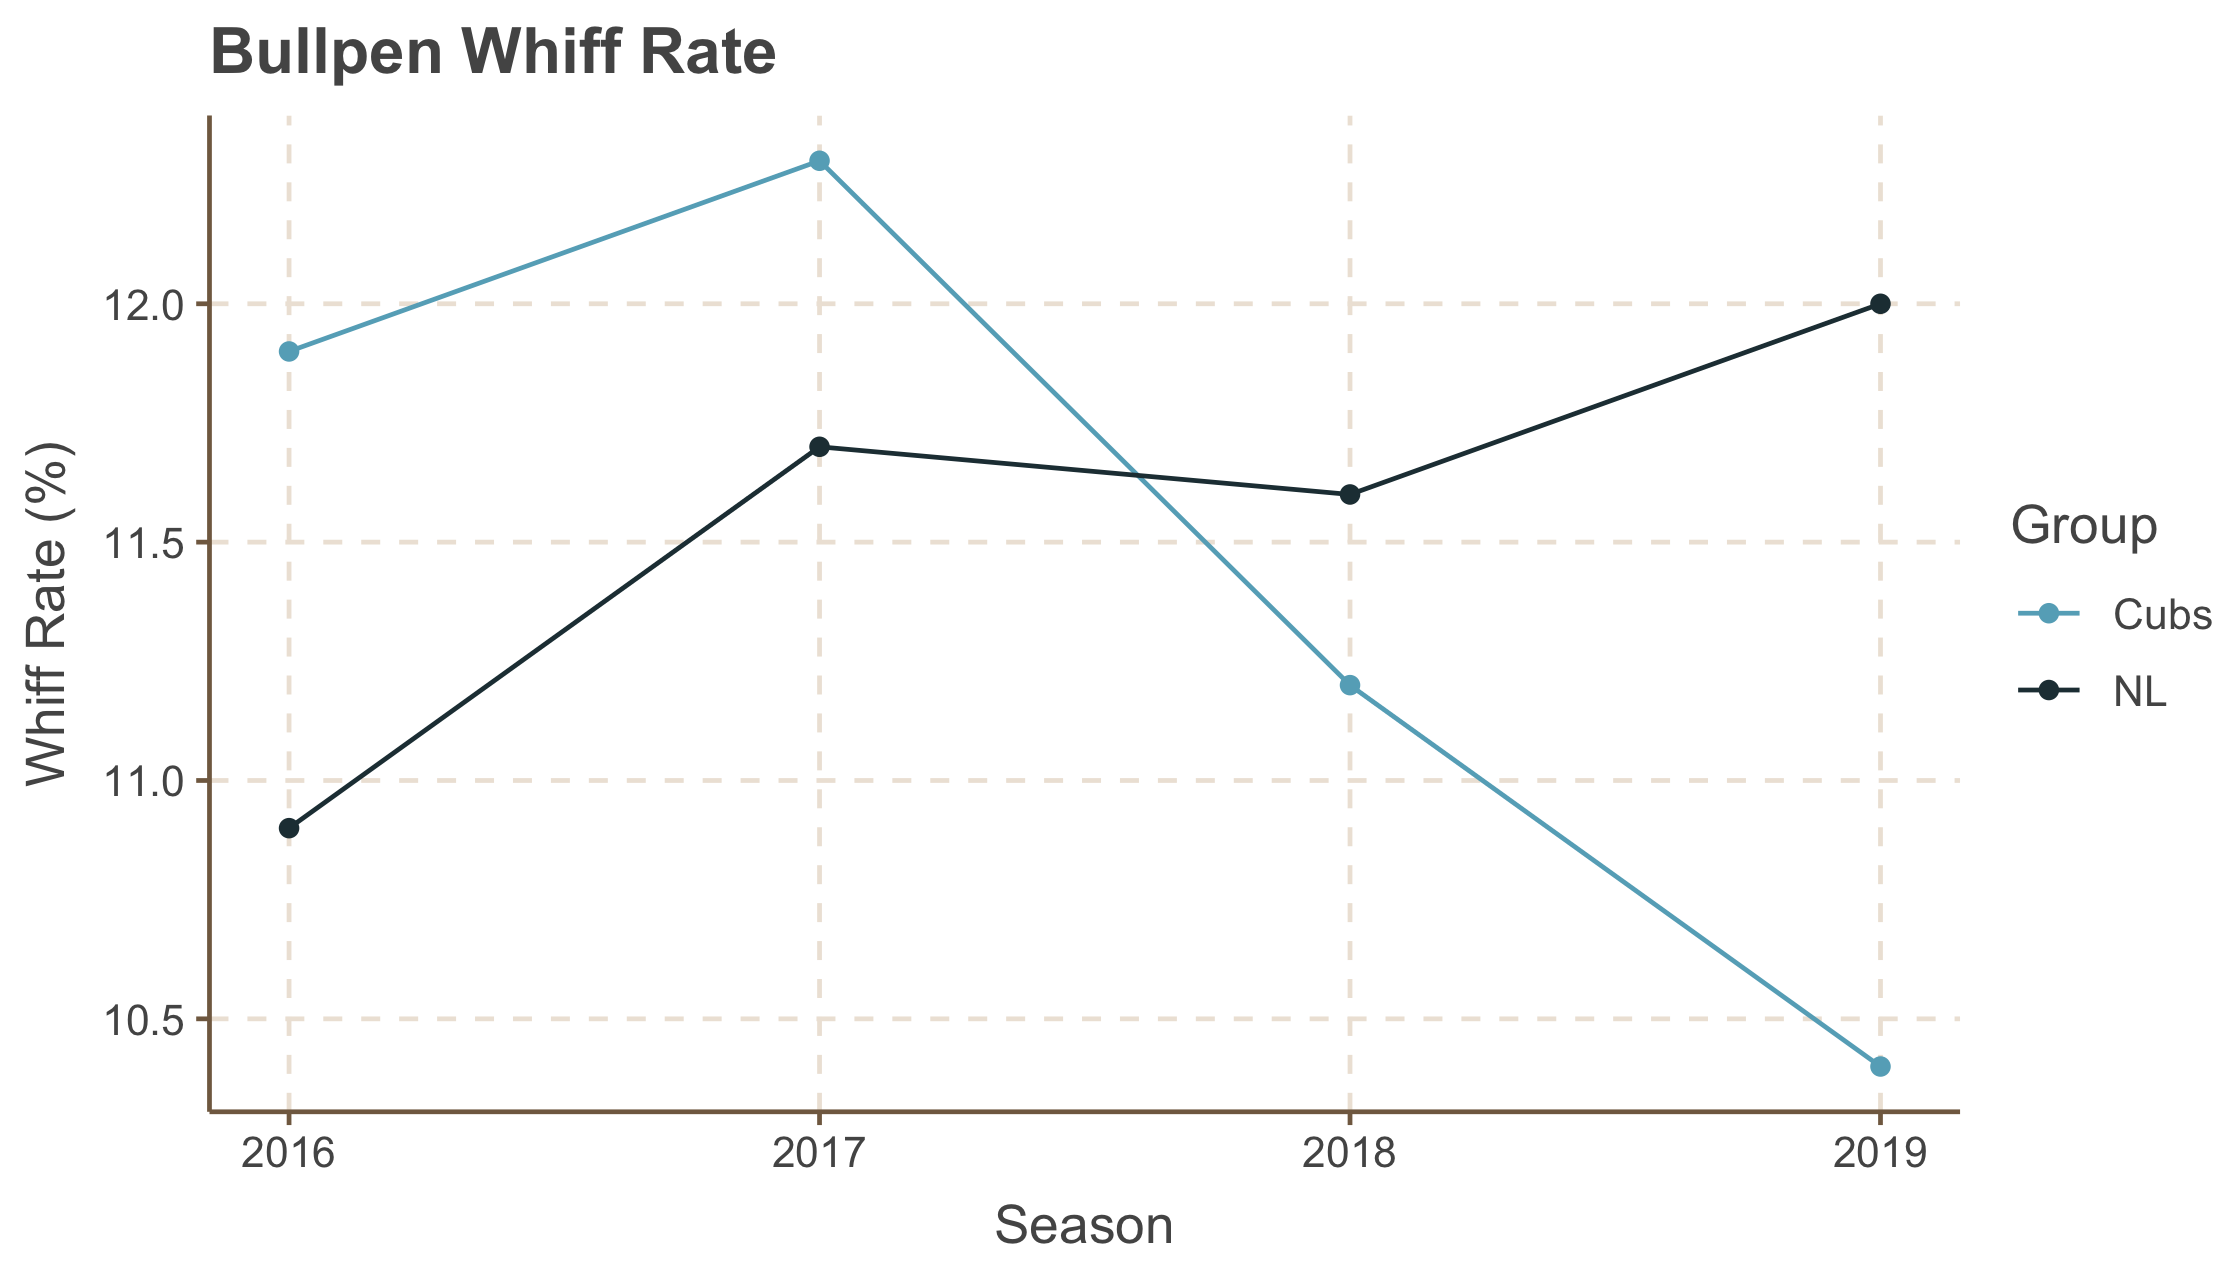 Whiff rate